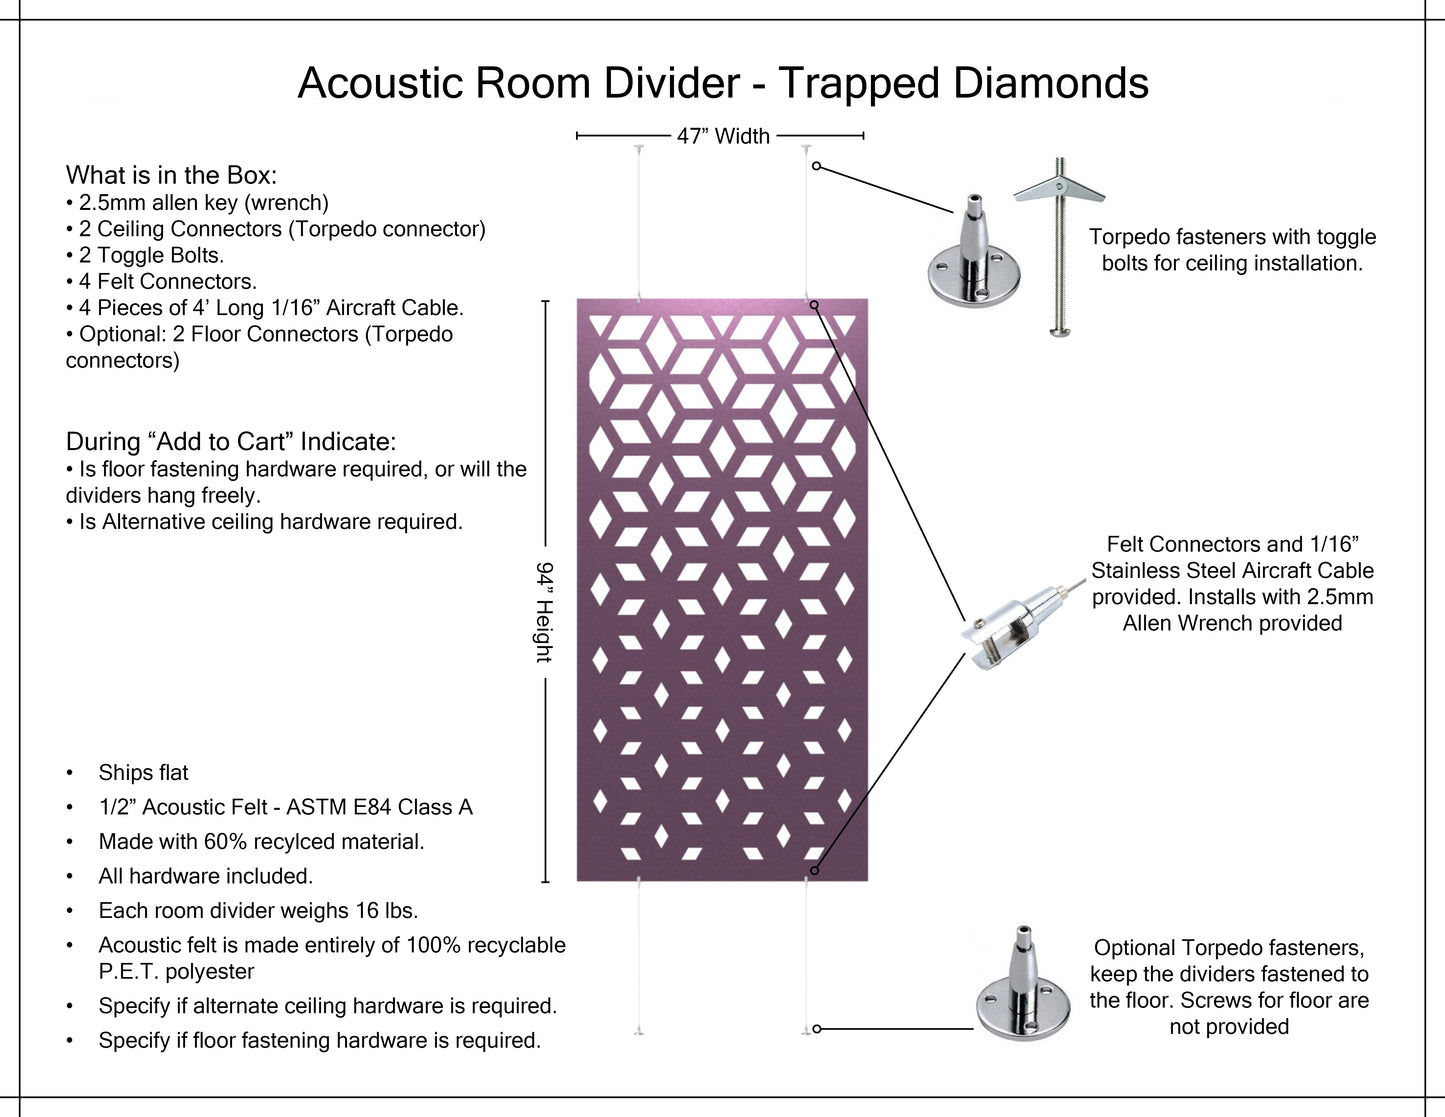 4x8 Acoustic Room Divider - Trapped Diamonds